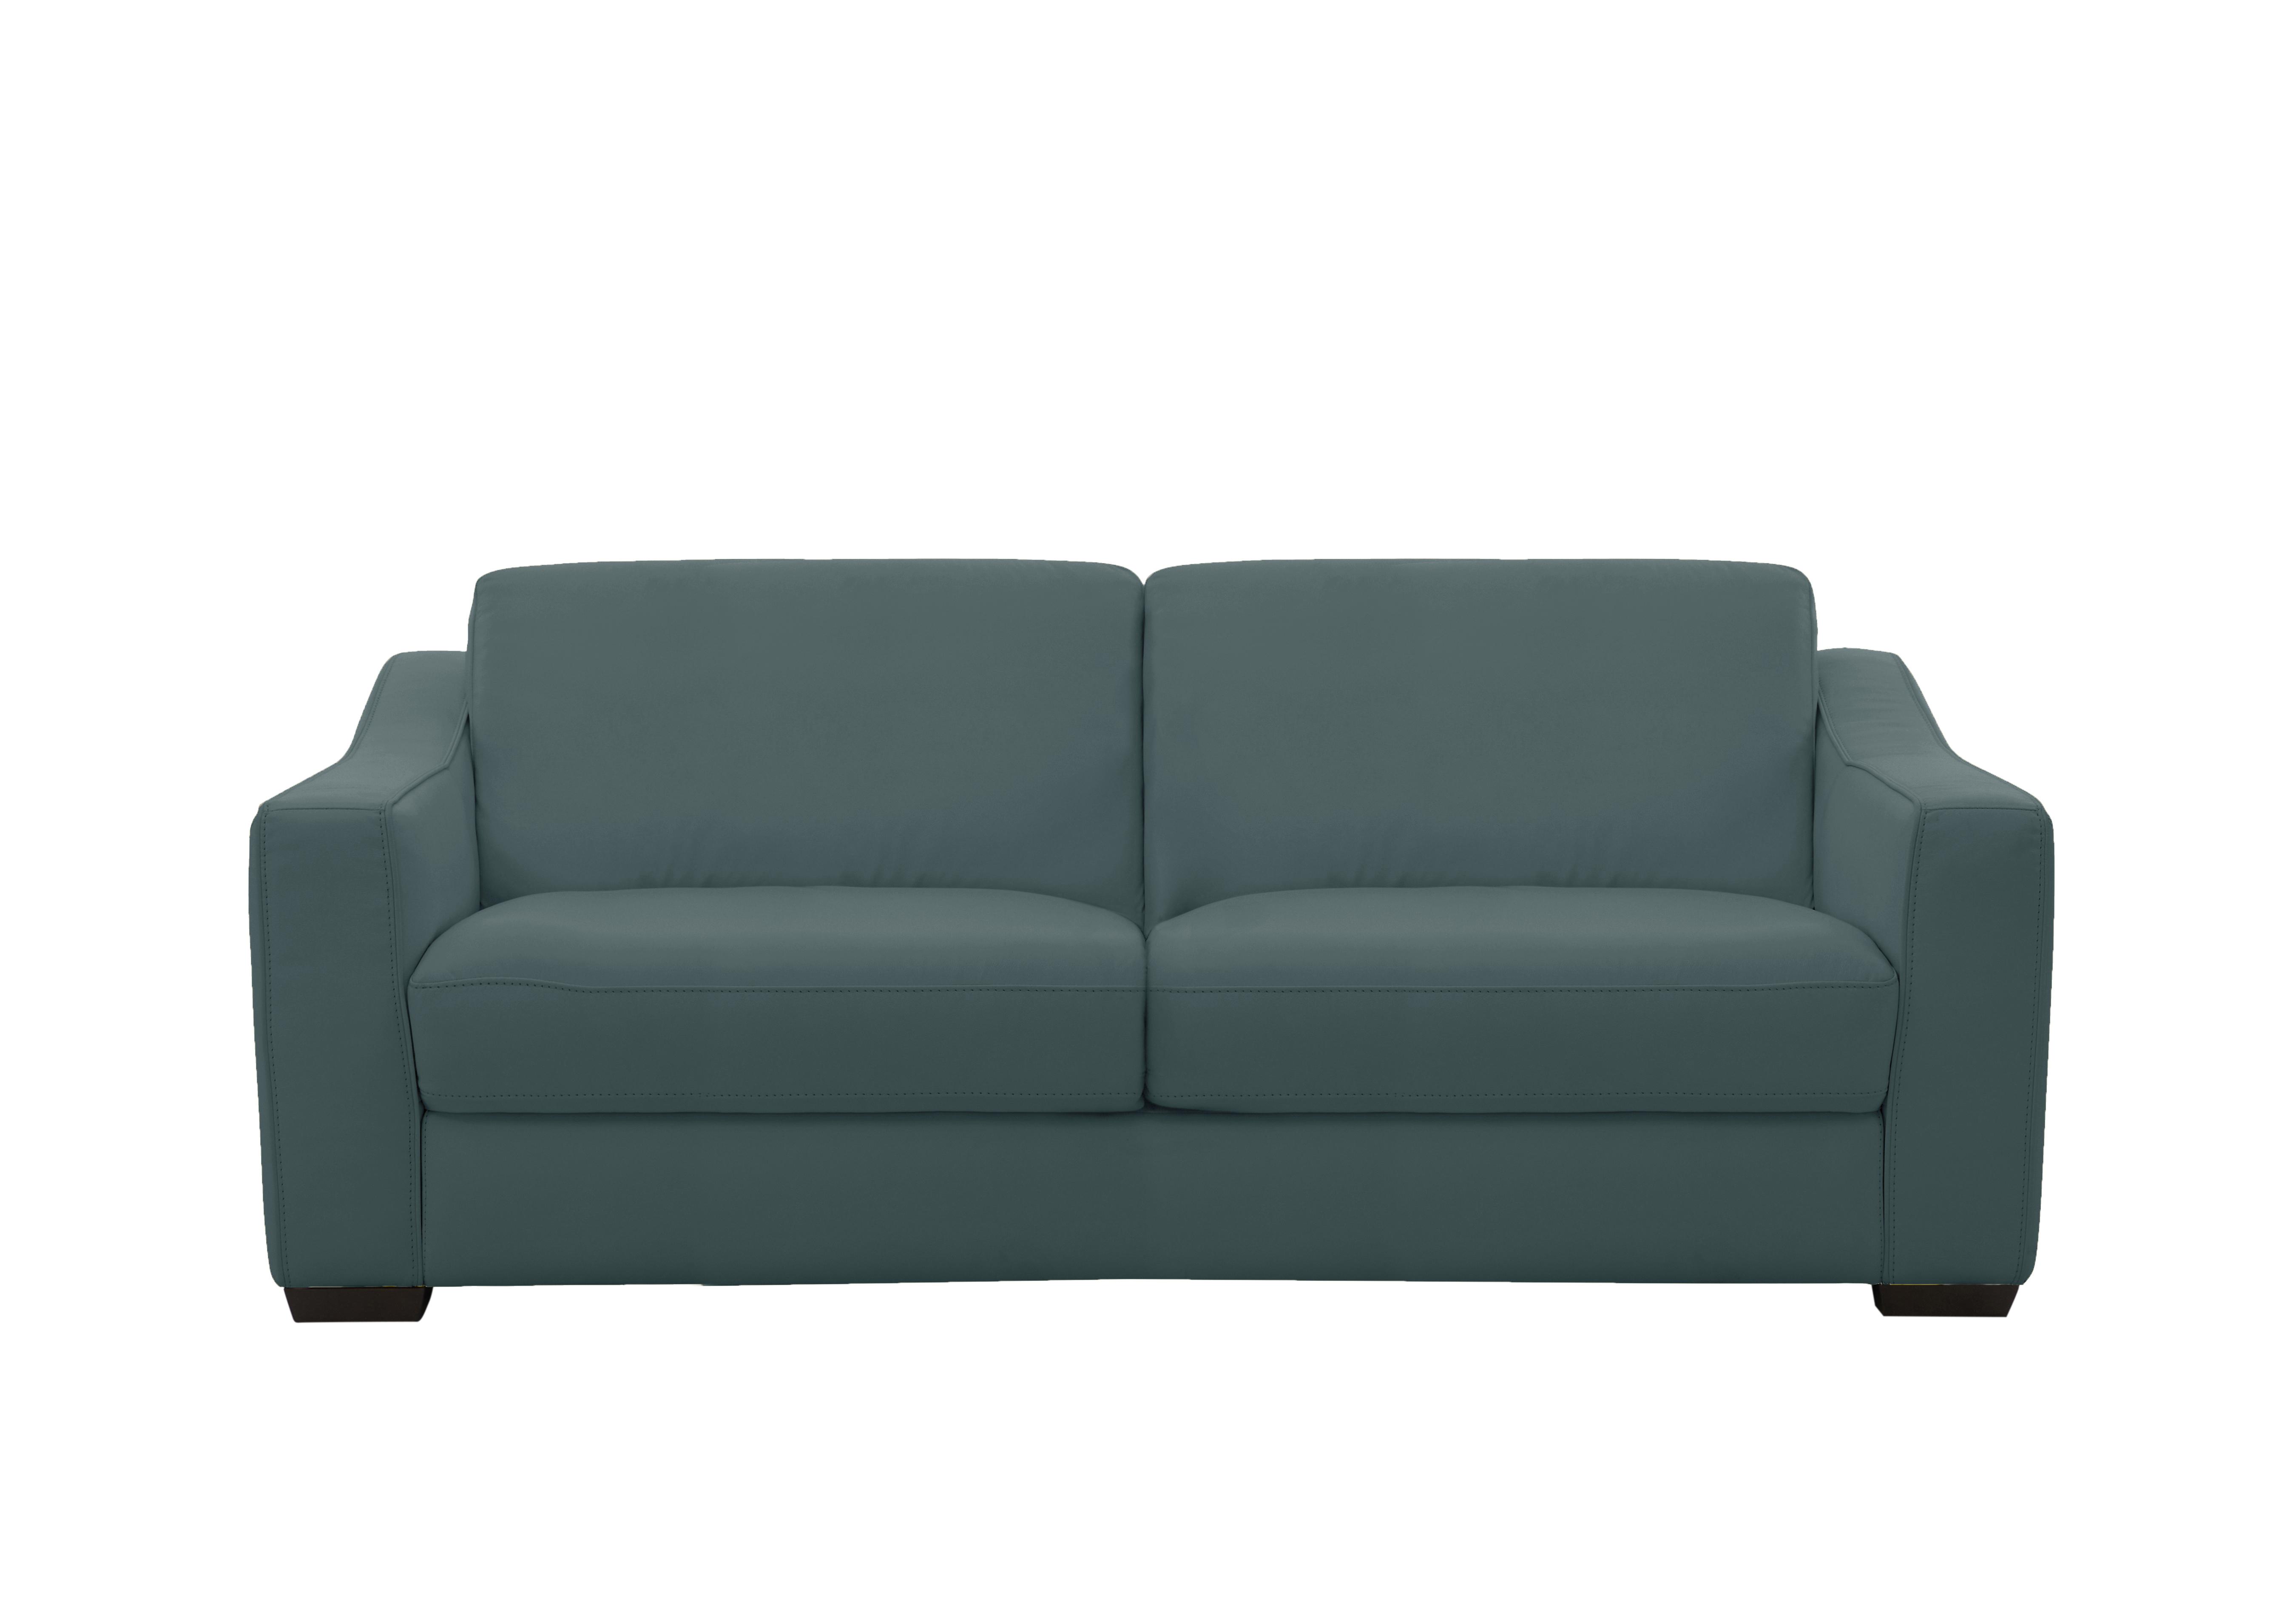 Optimus Space Saving Leather Sofa Bed with Memory Foam Mattress in Bv-301e Lake Green on Furniture Village